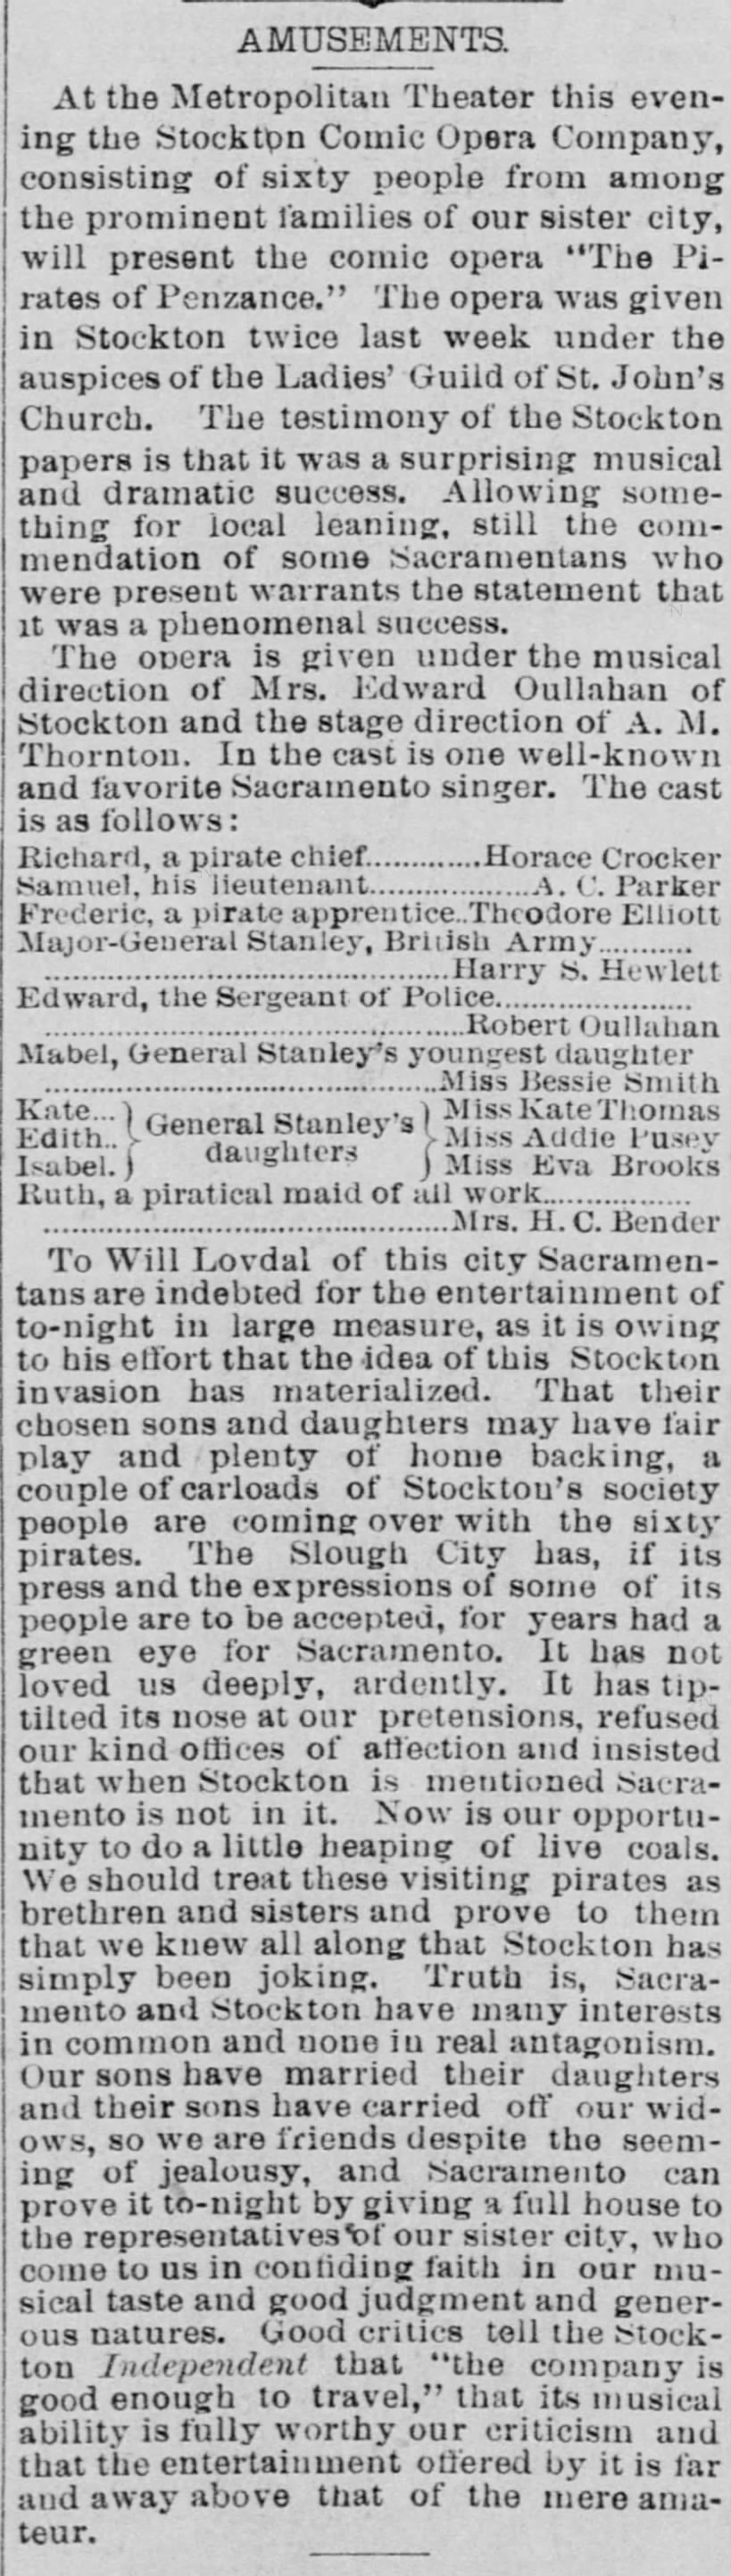 Will Lovdal, The Record-Union (Sacramento, CA) 11 Apr 1894, Wed, Page 6: